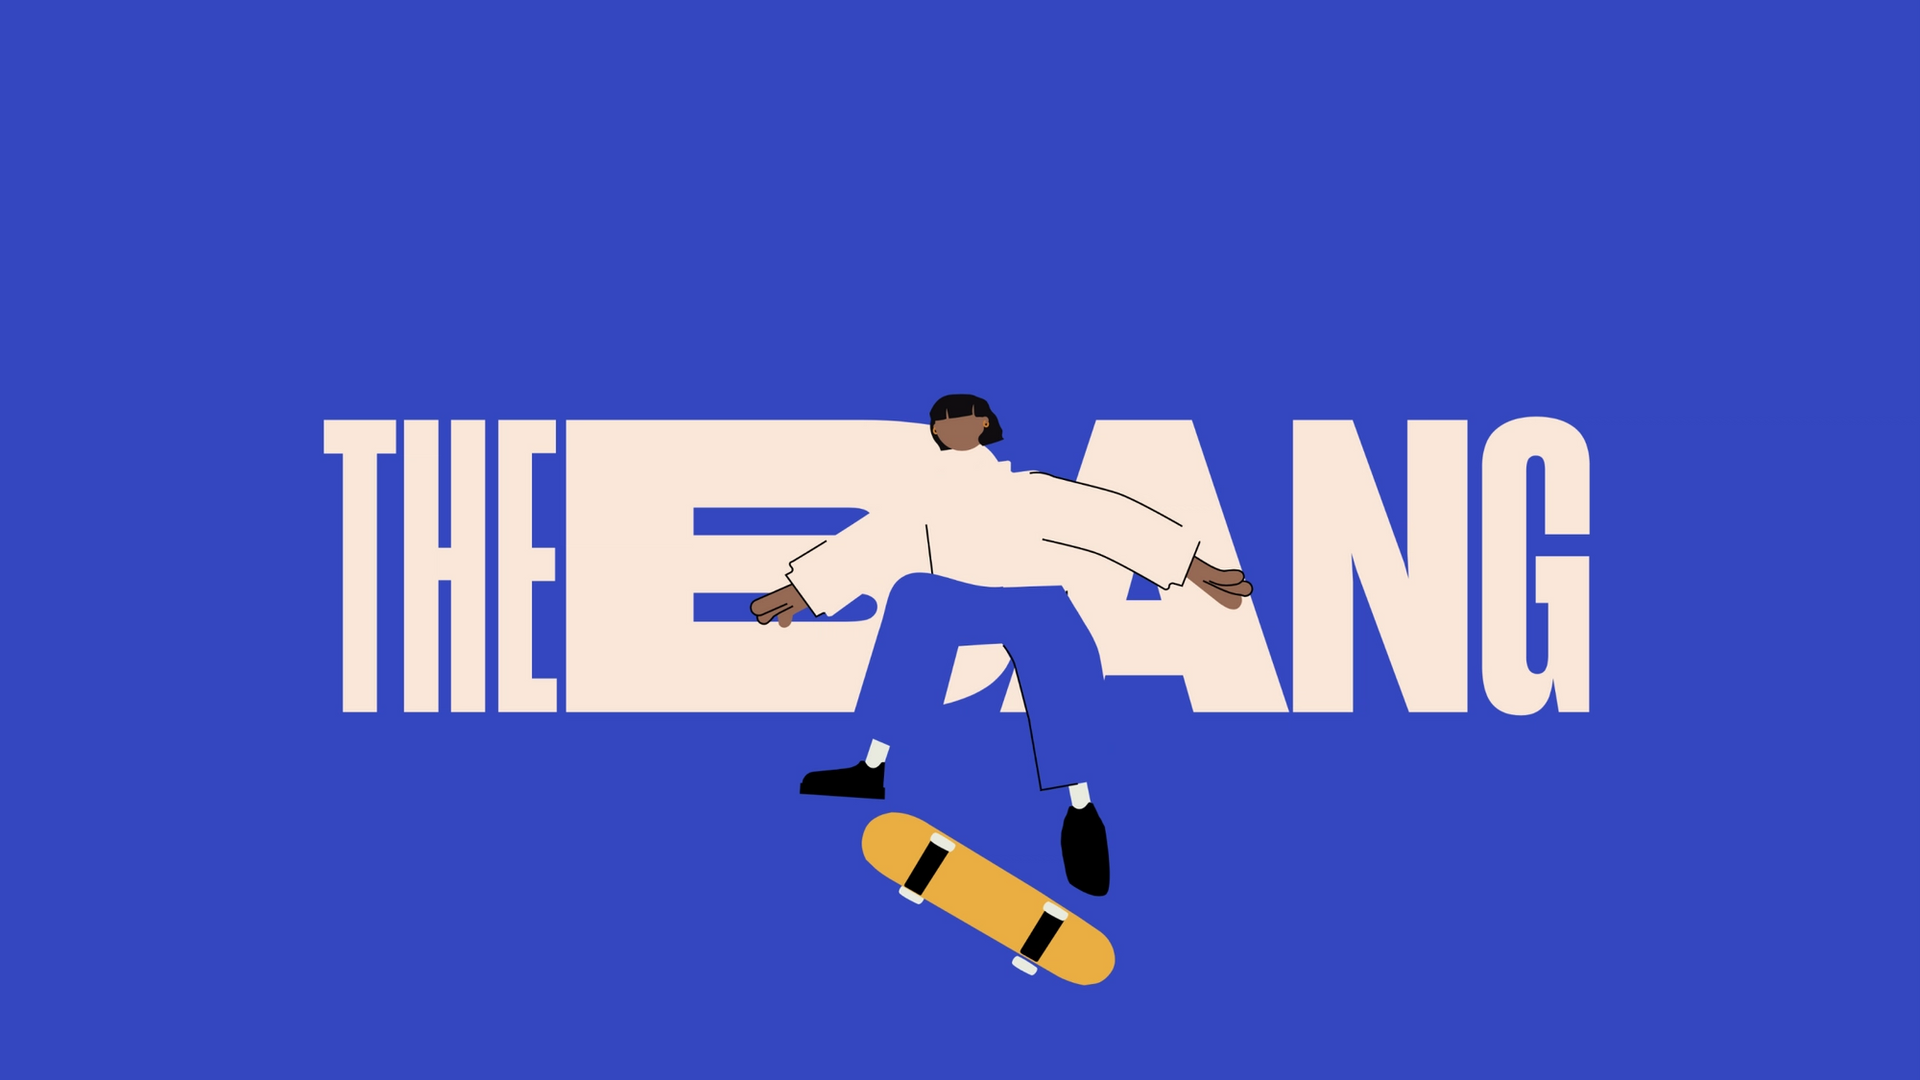 Gatsby.js website for The Bang Co showing a dude doing a wicked kick flip